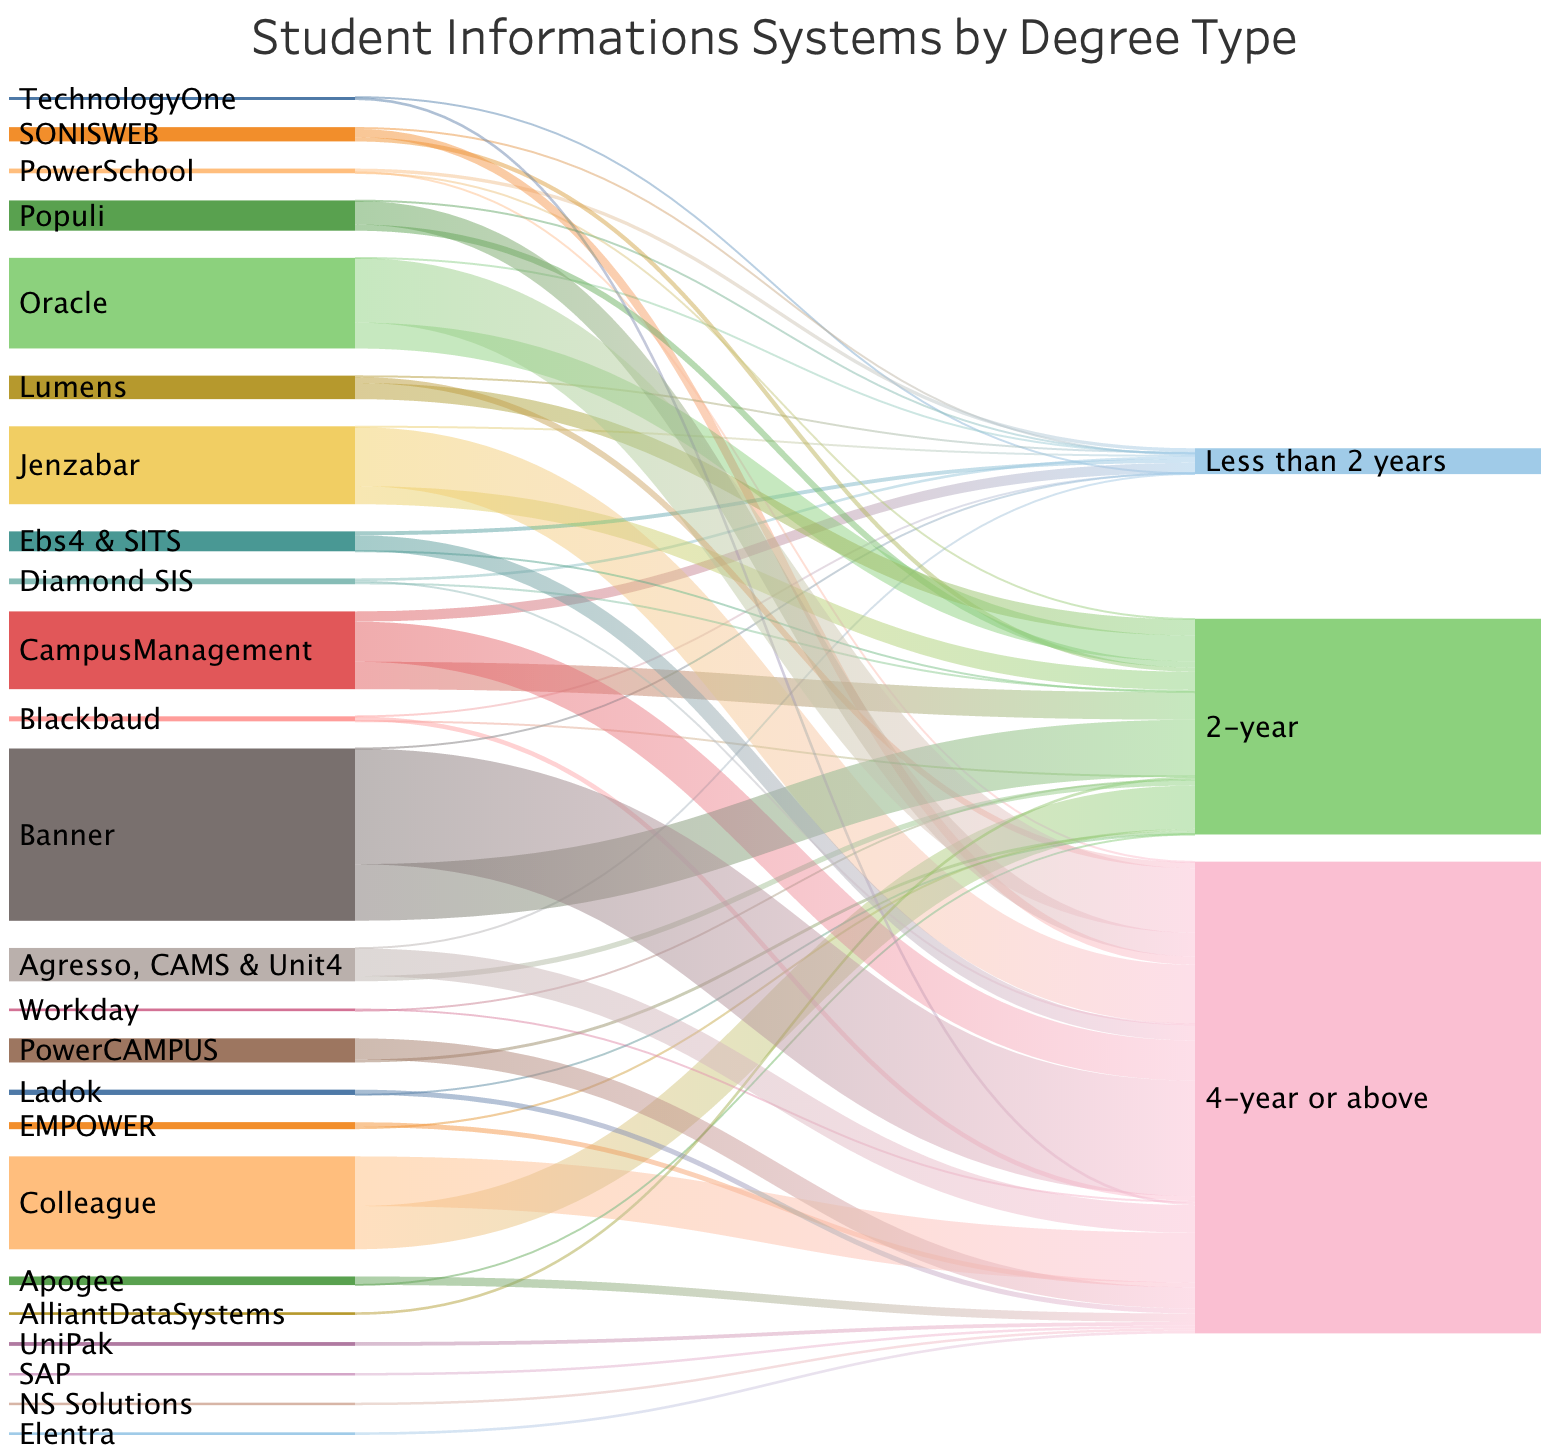 Student Informations Systems by Degree Type - LisTedTECH